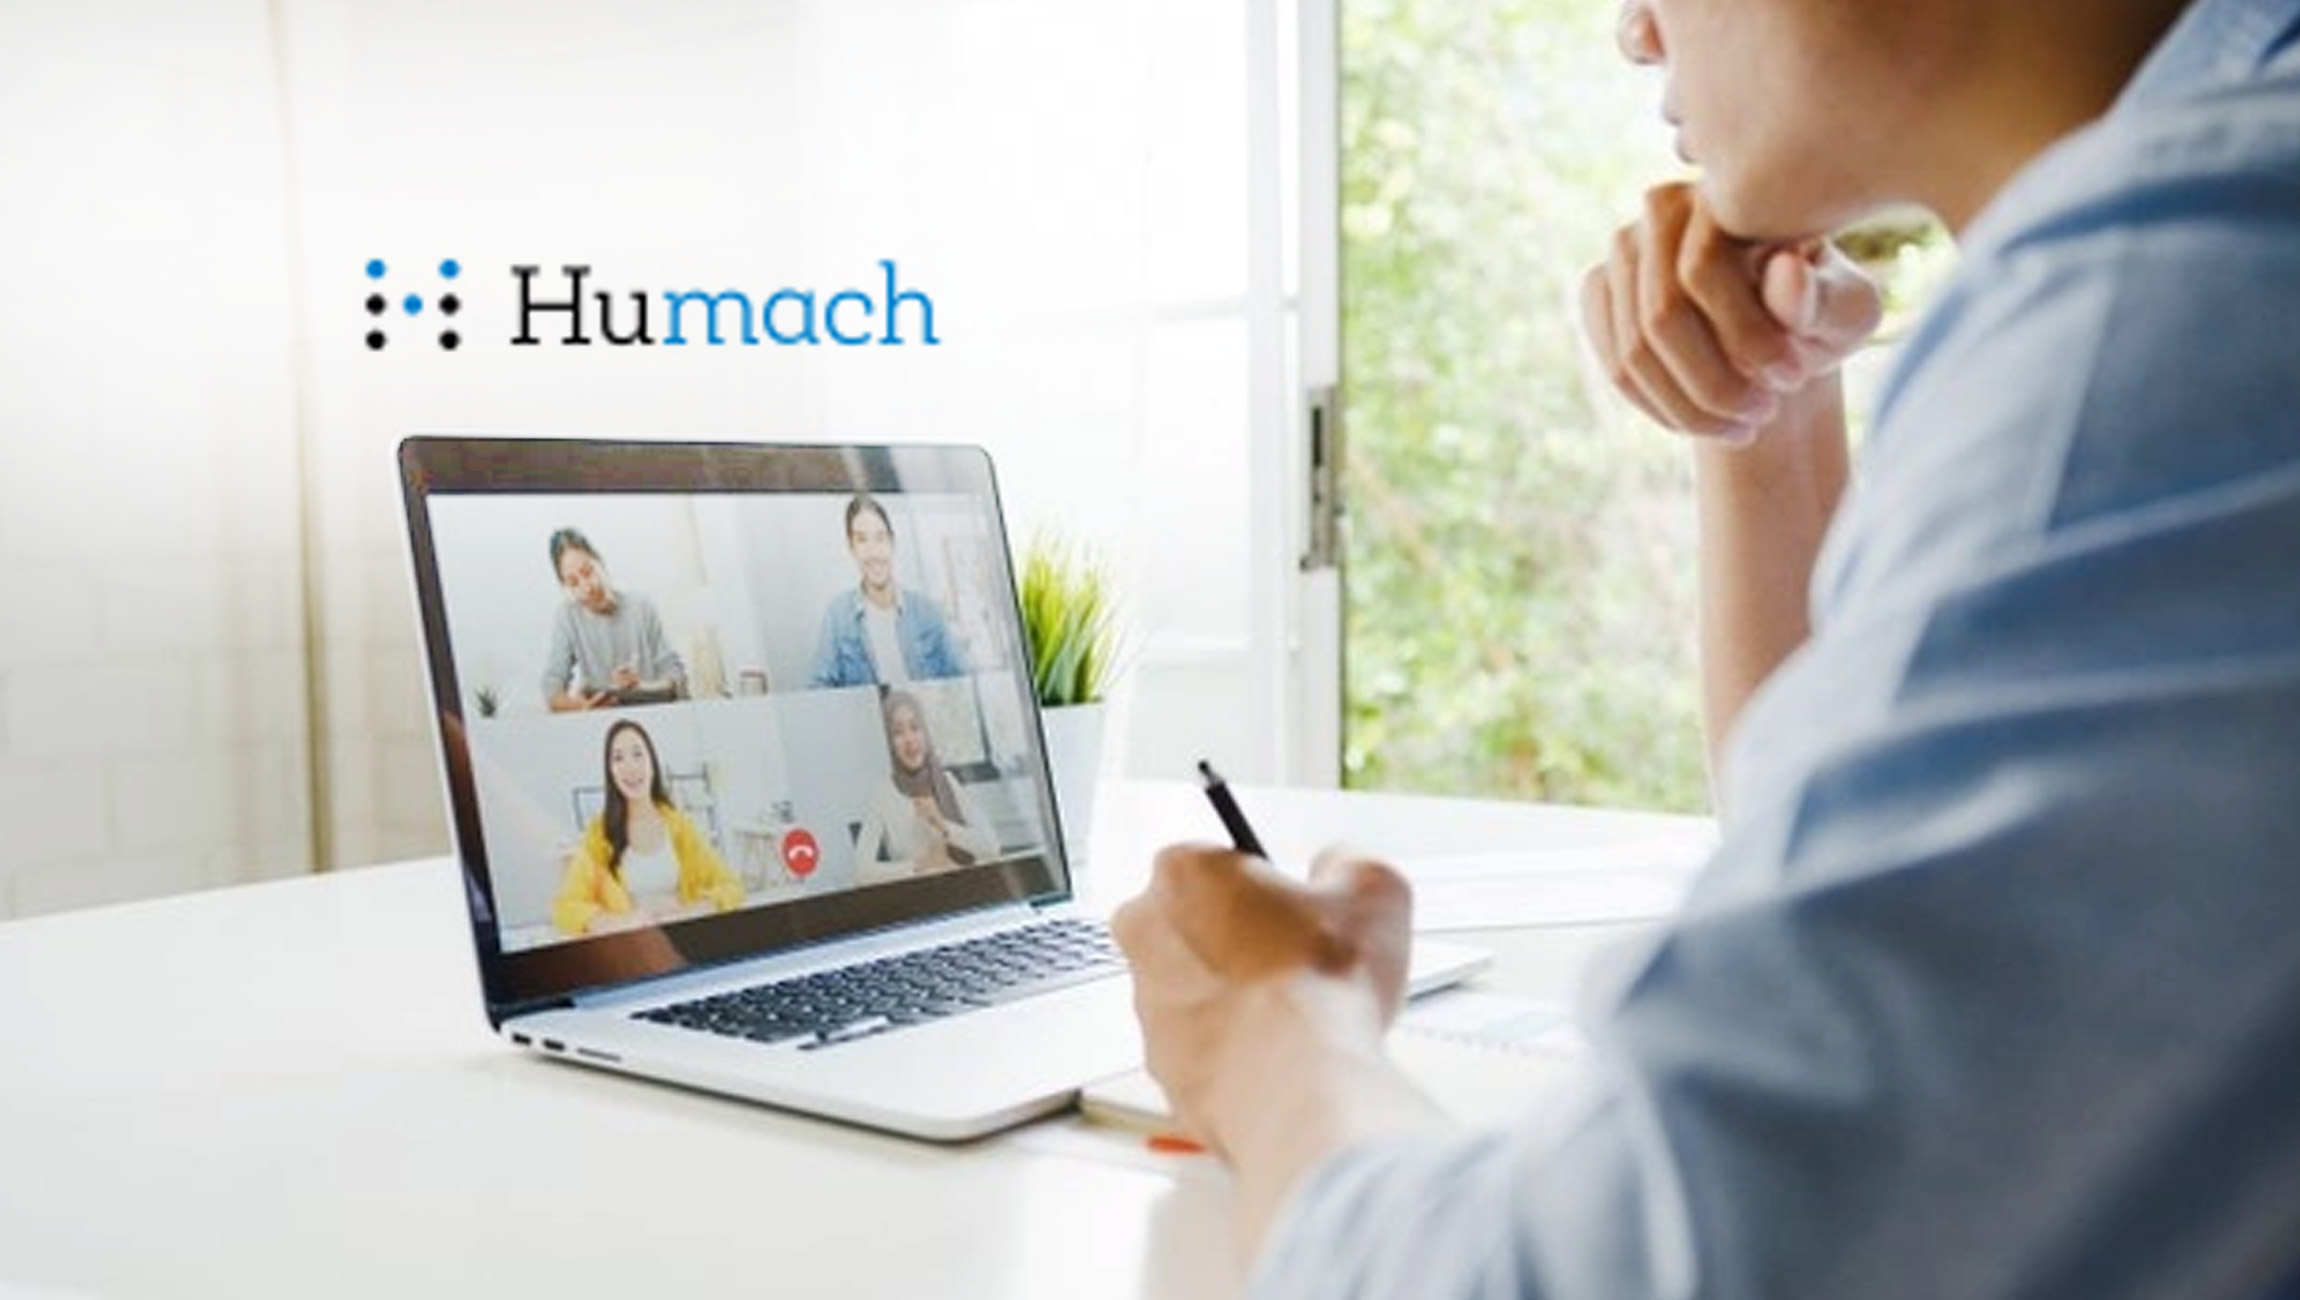 Humach Expresses Concern on New Compliance Vulnerabilities for Remote Contact Centers